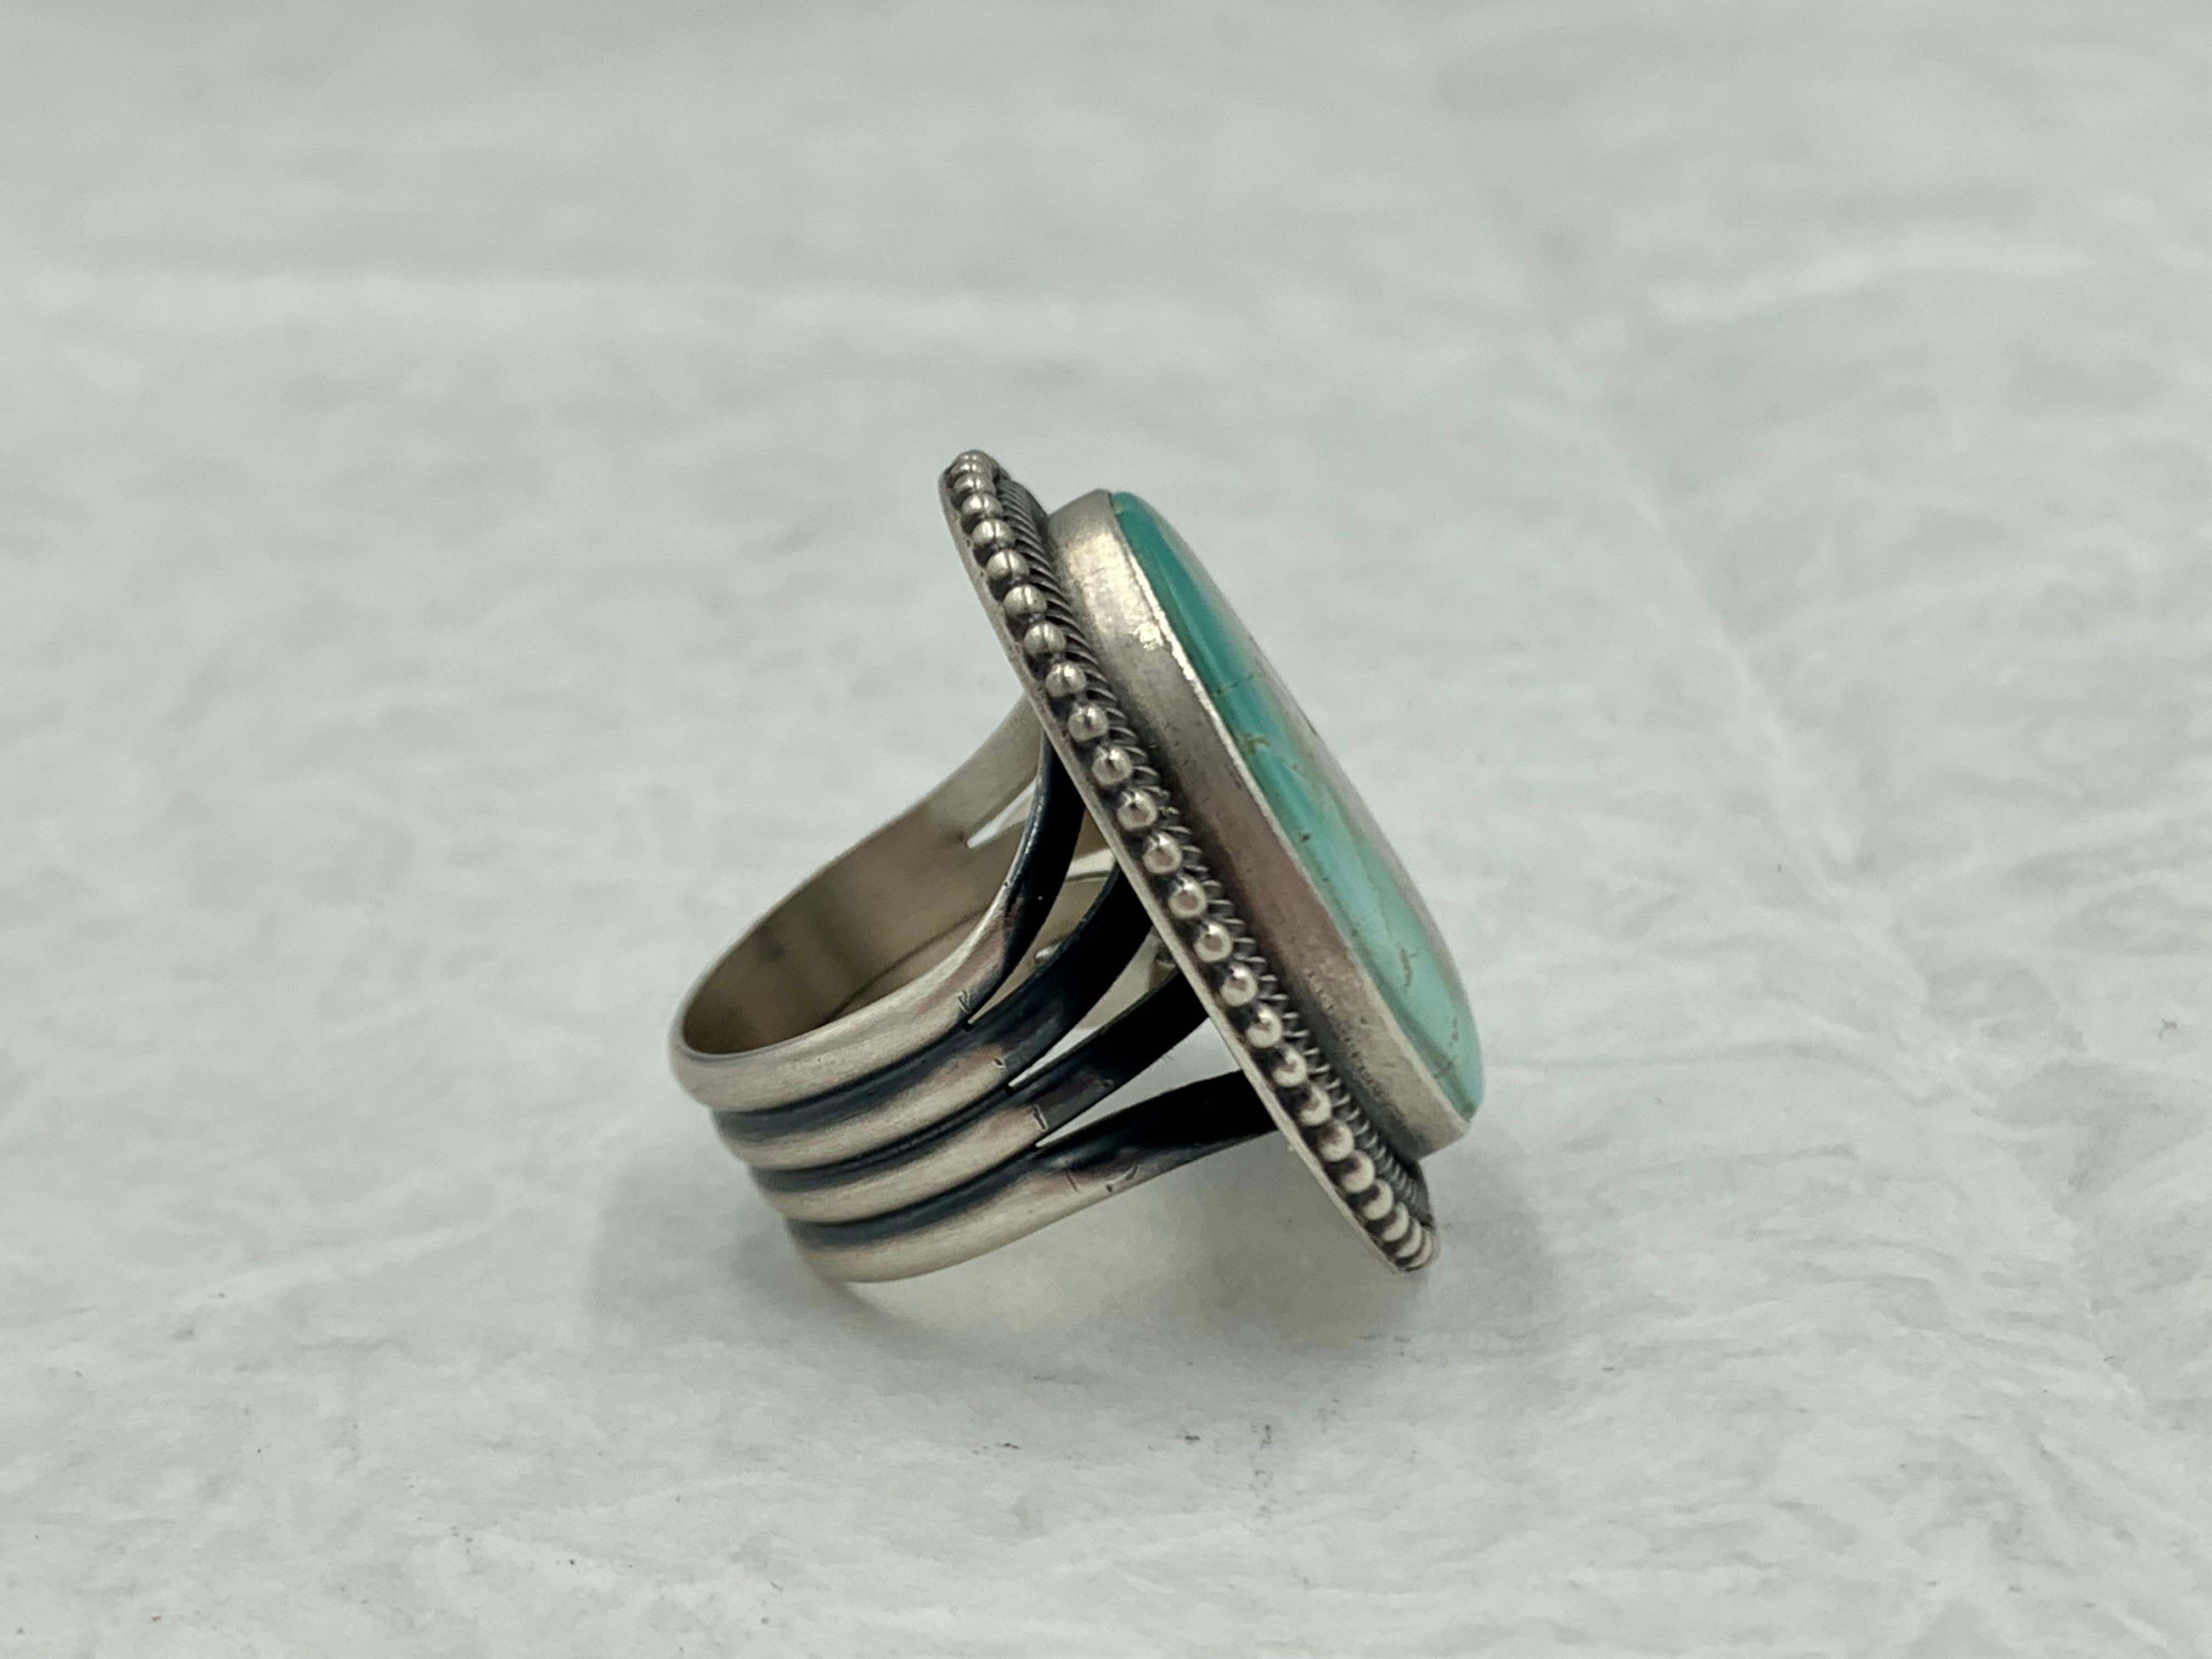 Sterling silver ring by Navajo silversmith Ernest Ray Begay. A smooth bezel, twisted wire and bead wire focuses your attention on the 3/4” x 1” Royston turquoise stone.

Ernest’s career in jewelry making didn’t really take off until he entered some